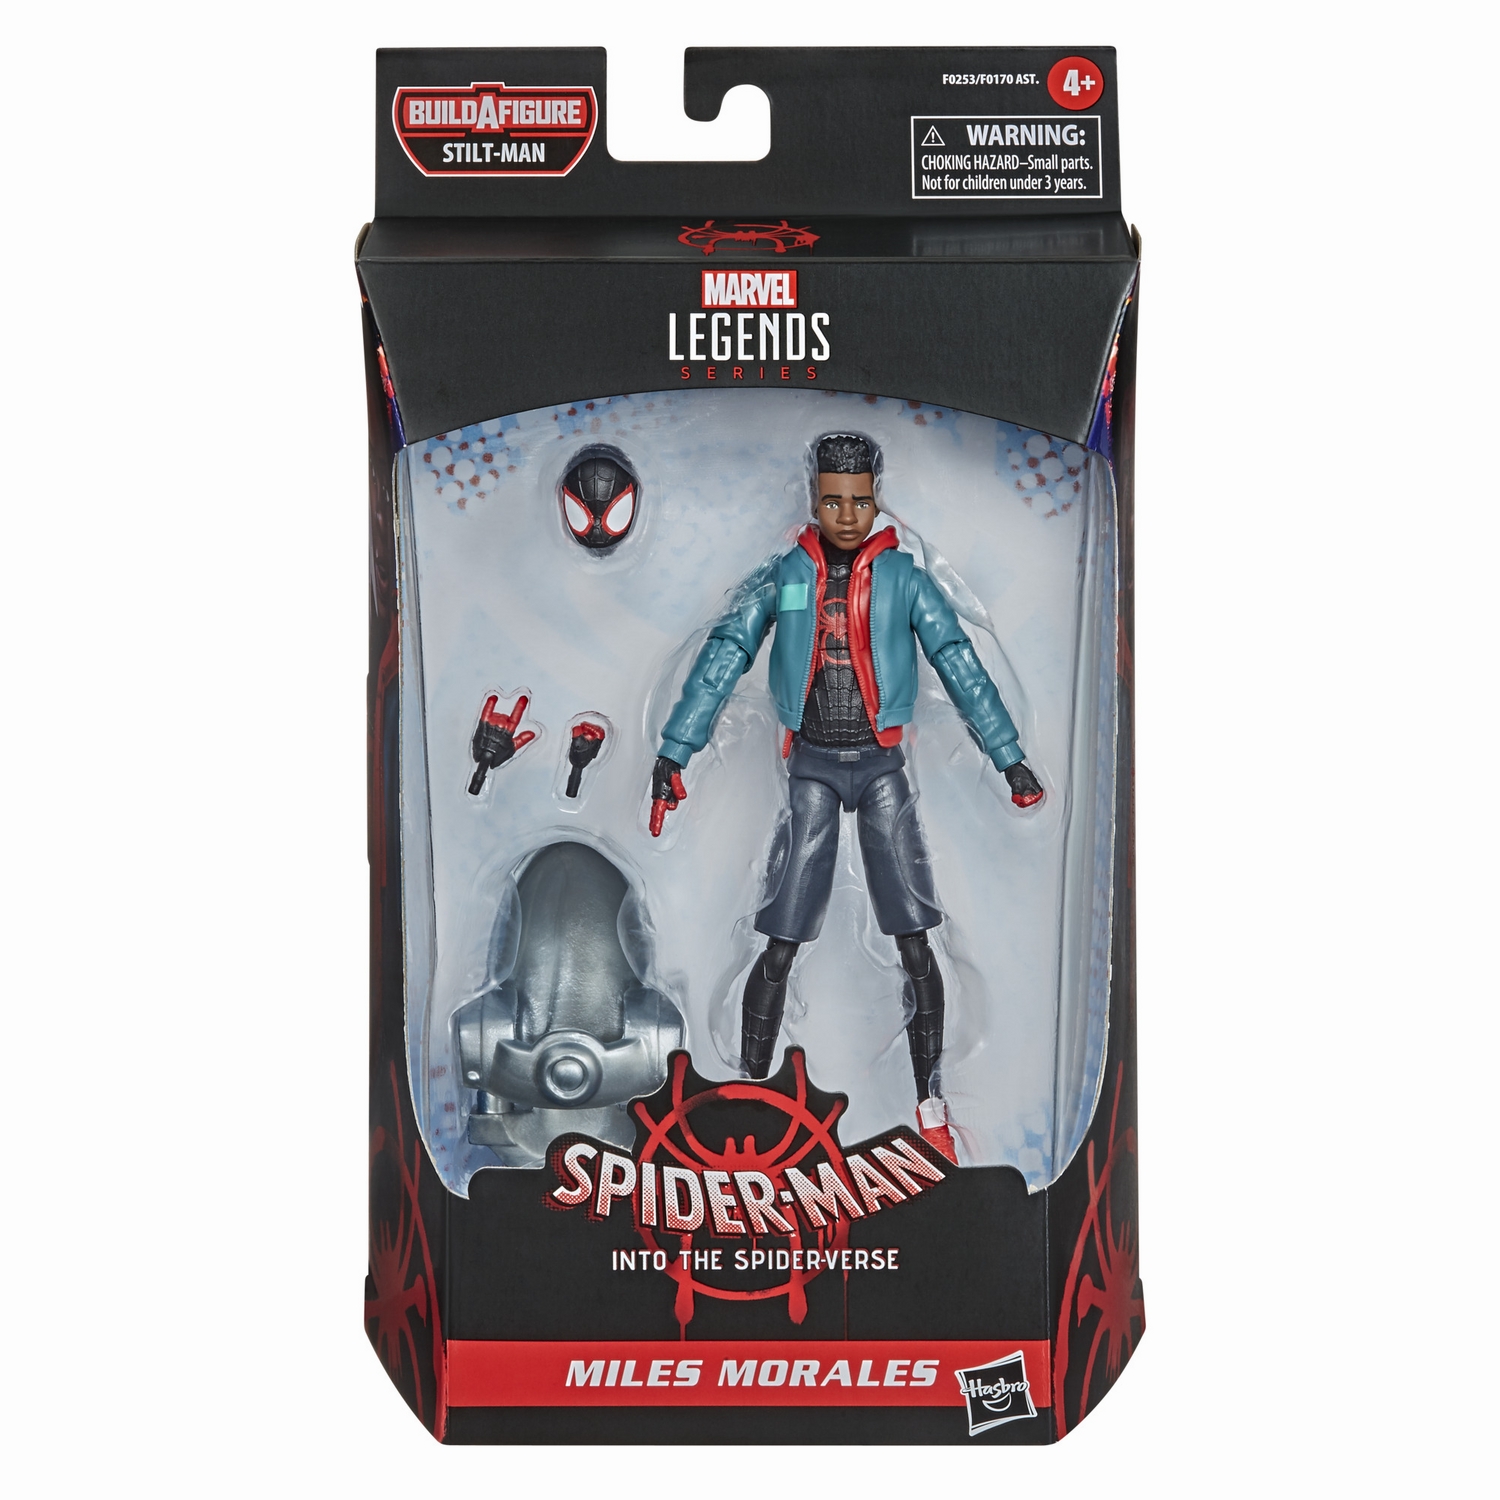 MARVEL LEGENDS SERIES SPIDER-MAN INTO THE SPIDER-VERSE 6-INCH MILES MORALES Figure - in pck.jpg